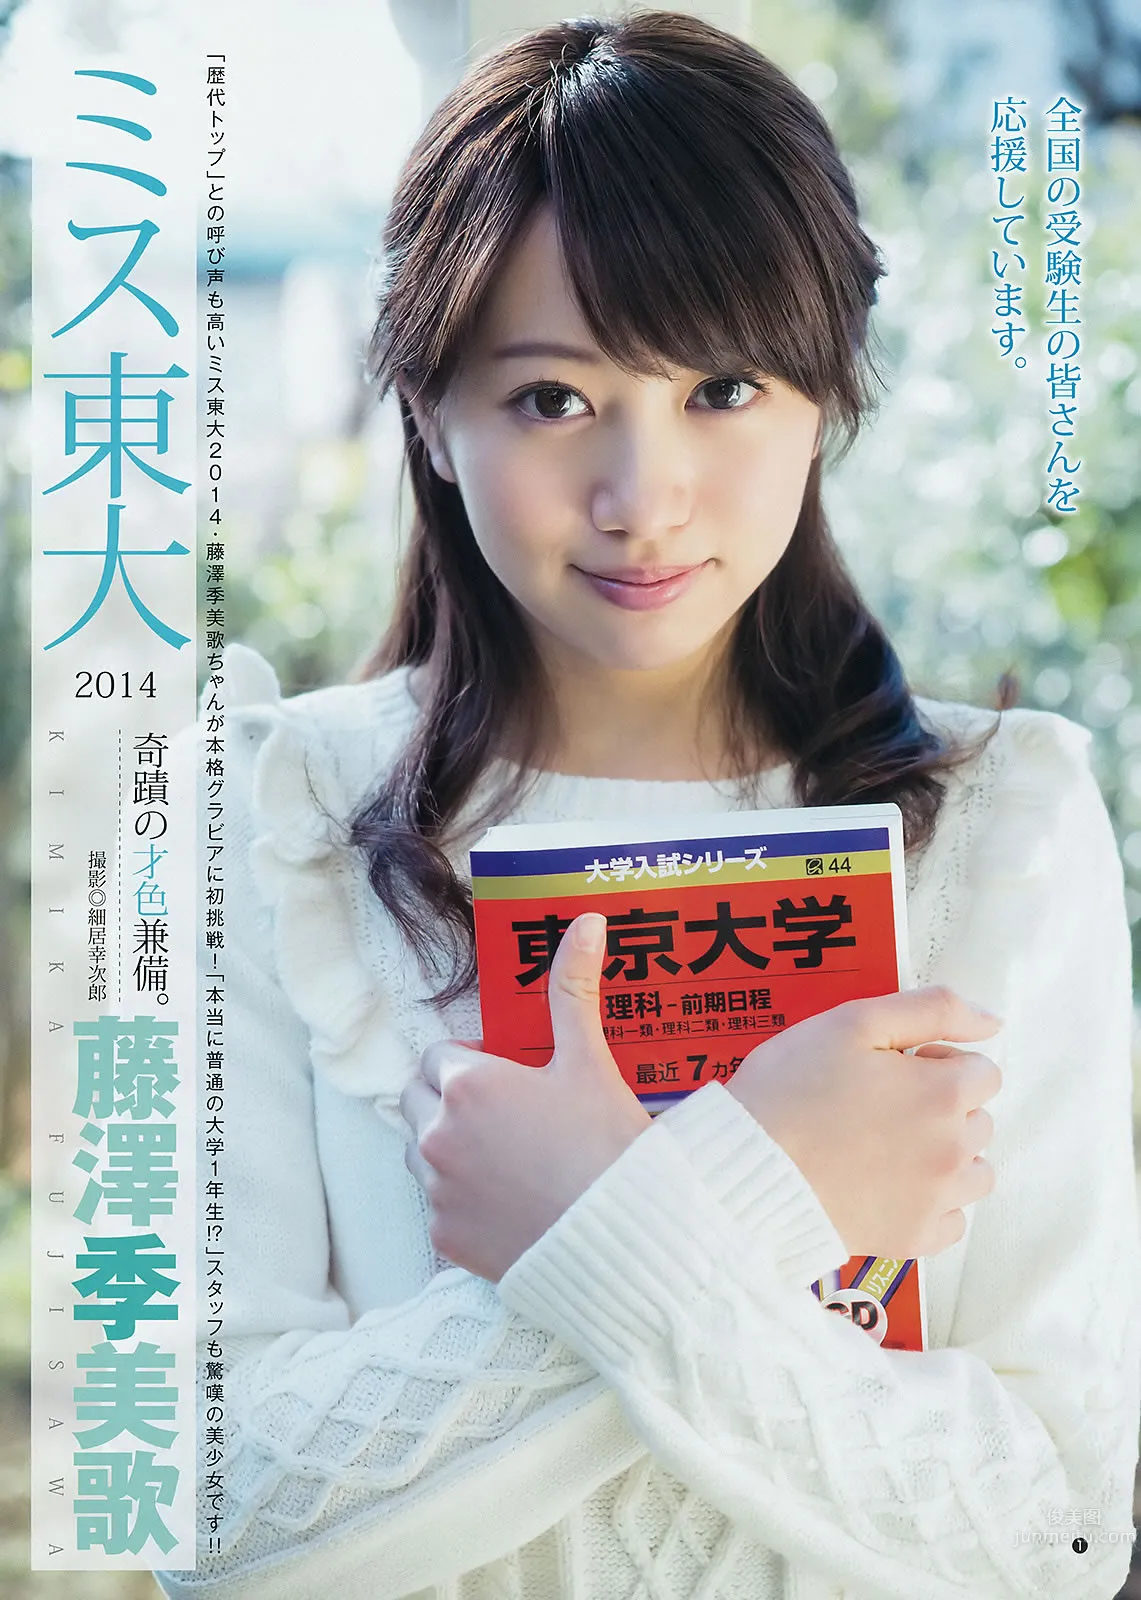 [Weekly Young Jump] 2015 No.10 11 最上もが 藤泽季美歌 佐藤美希_20